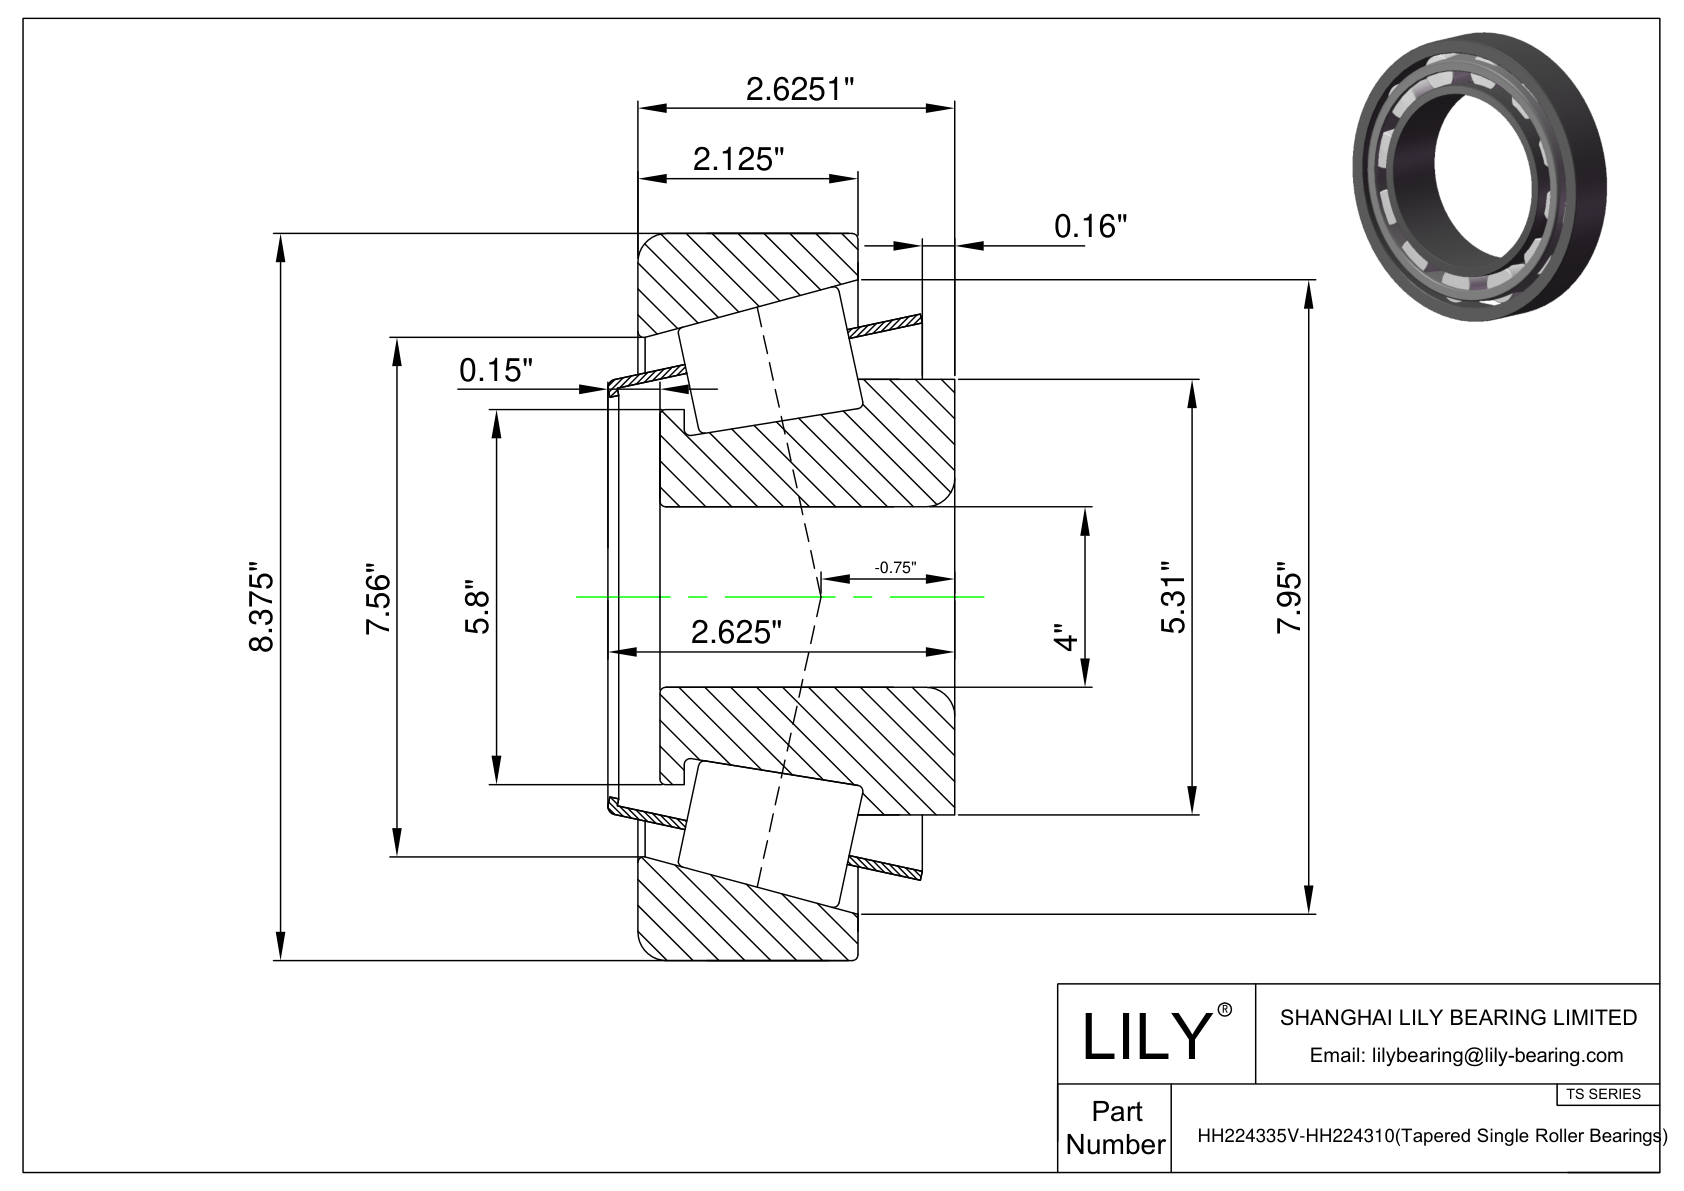 HH224335V-HH224310 TS (Tapered Single Roller Bearings) (Imperial) cad drawing